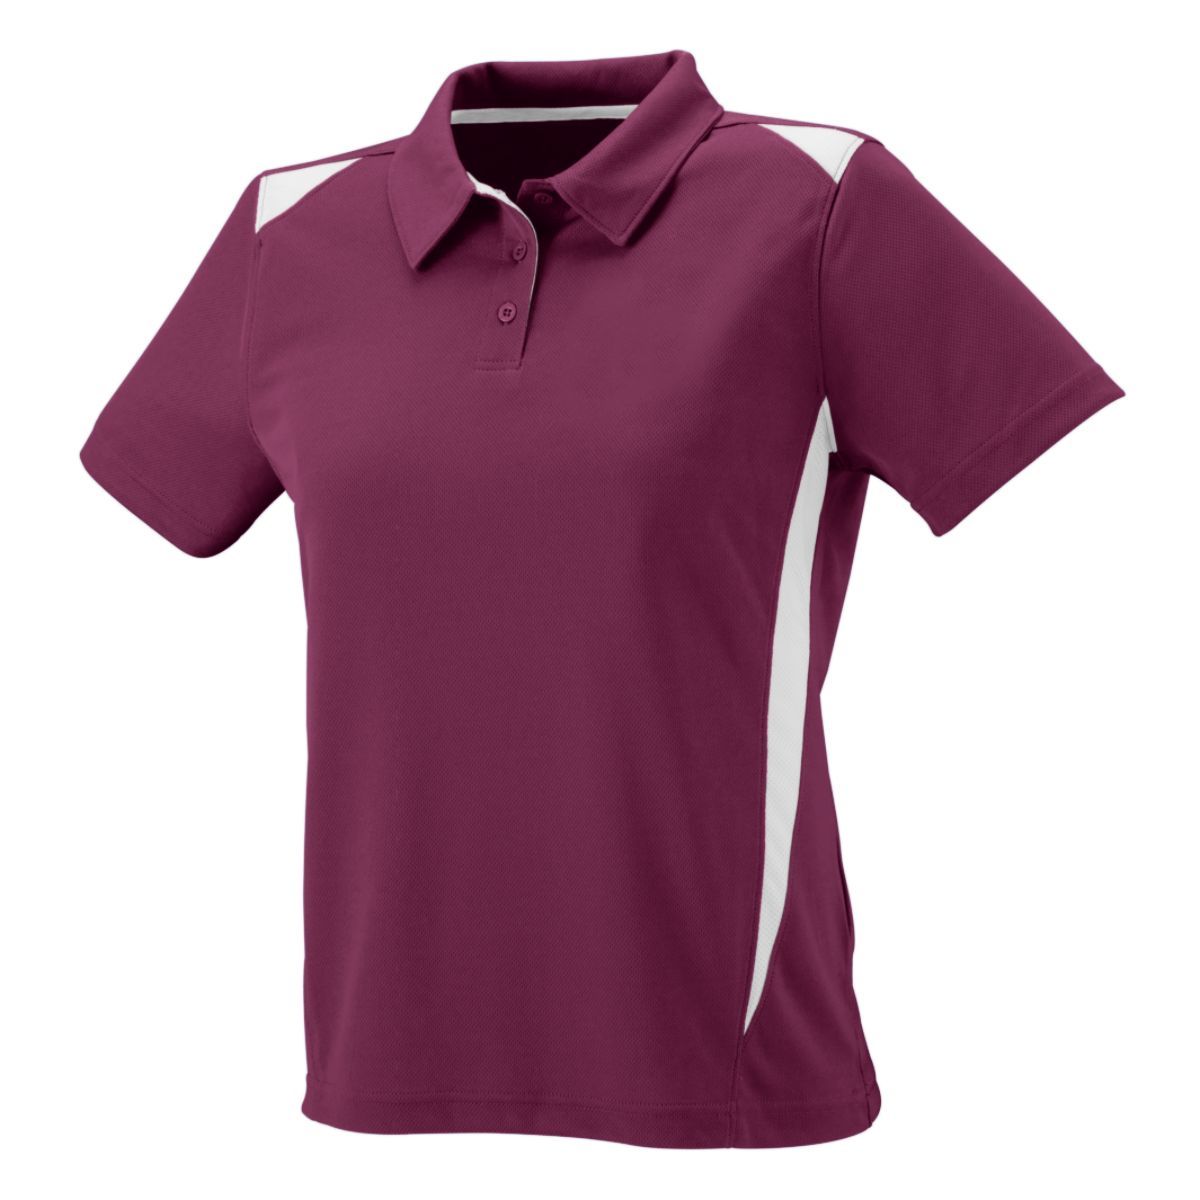 Augusta Sportswear Ladies Premier Polo in Maroon/White  -Part of the Ladies, Ladies-Polo, Polos, Augusta-Products, Shirts product lines at KanaleyCreations.com